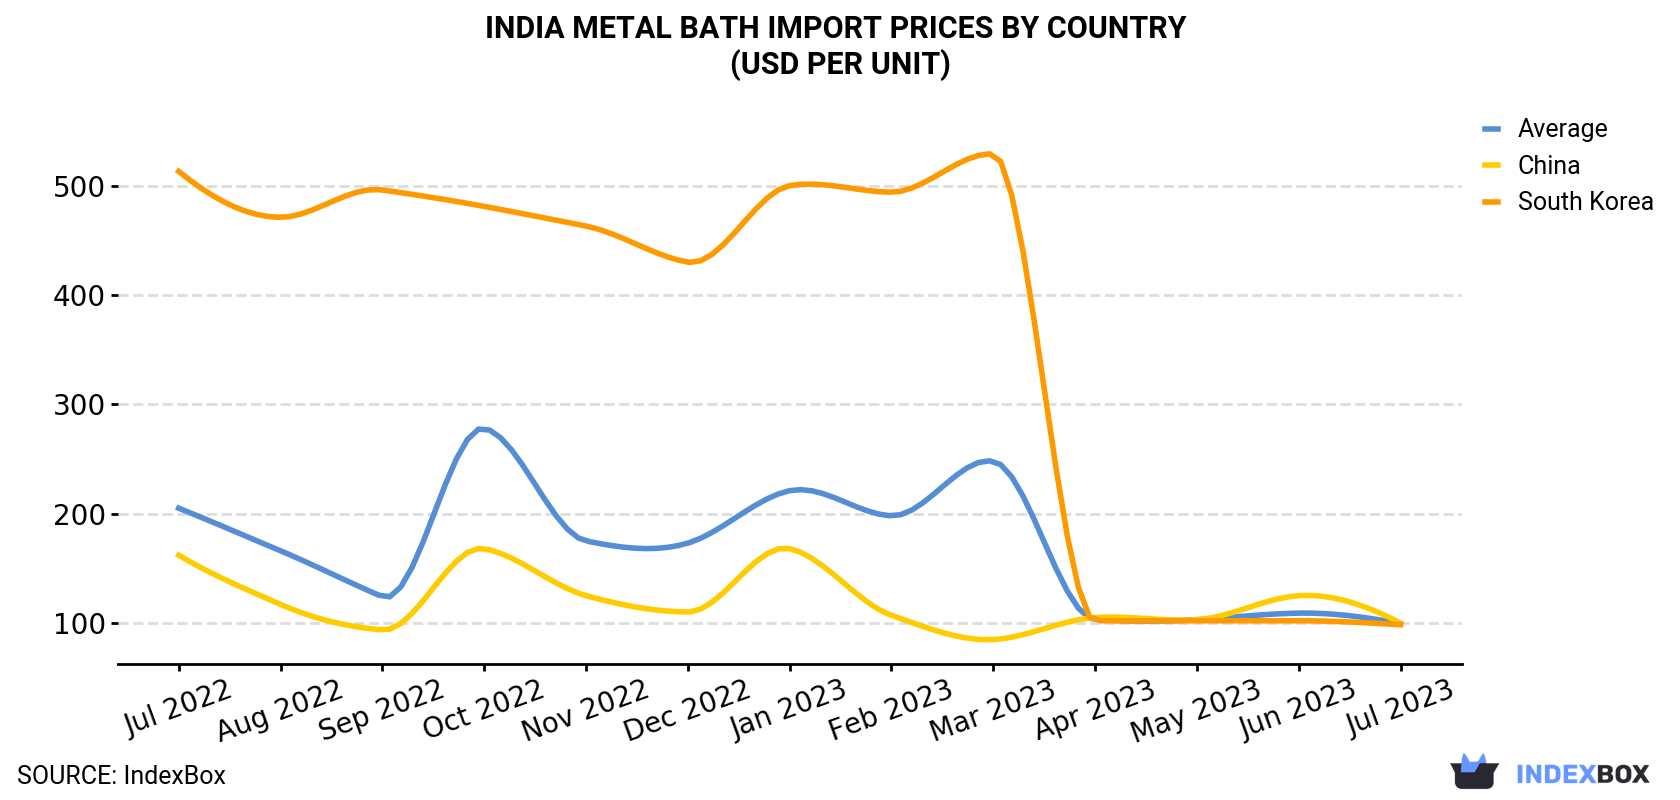 India Metal Bath Import Prices By Country (USD Per Unit)